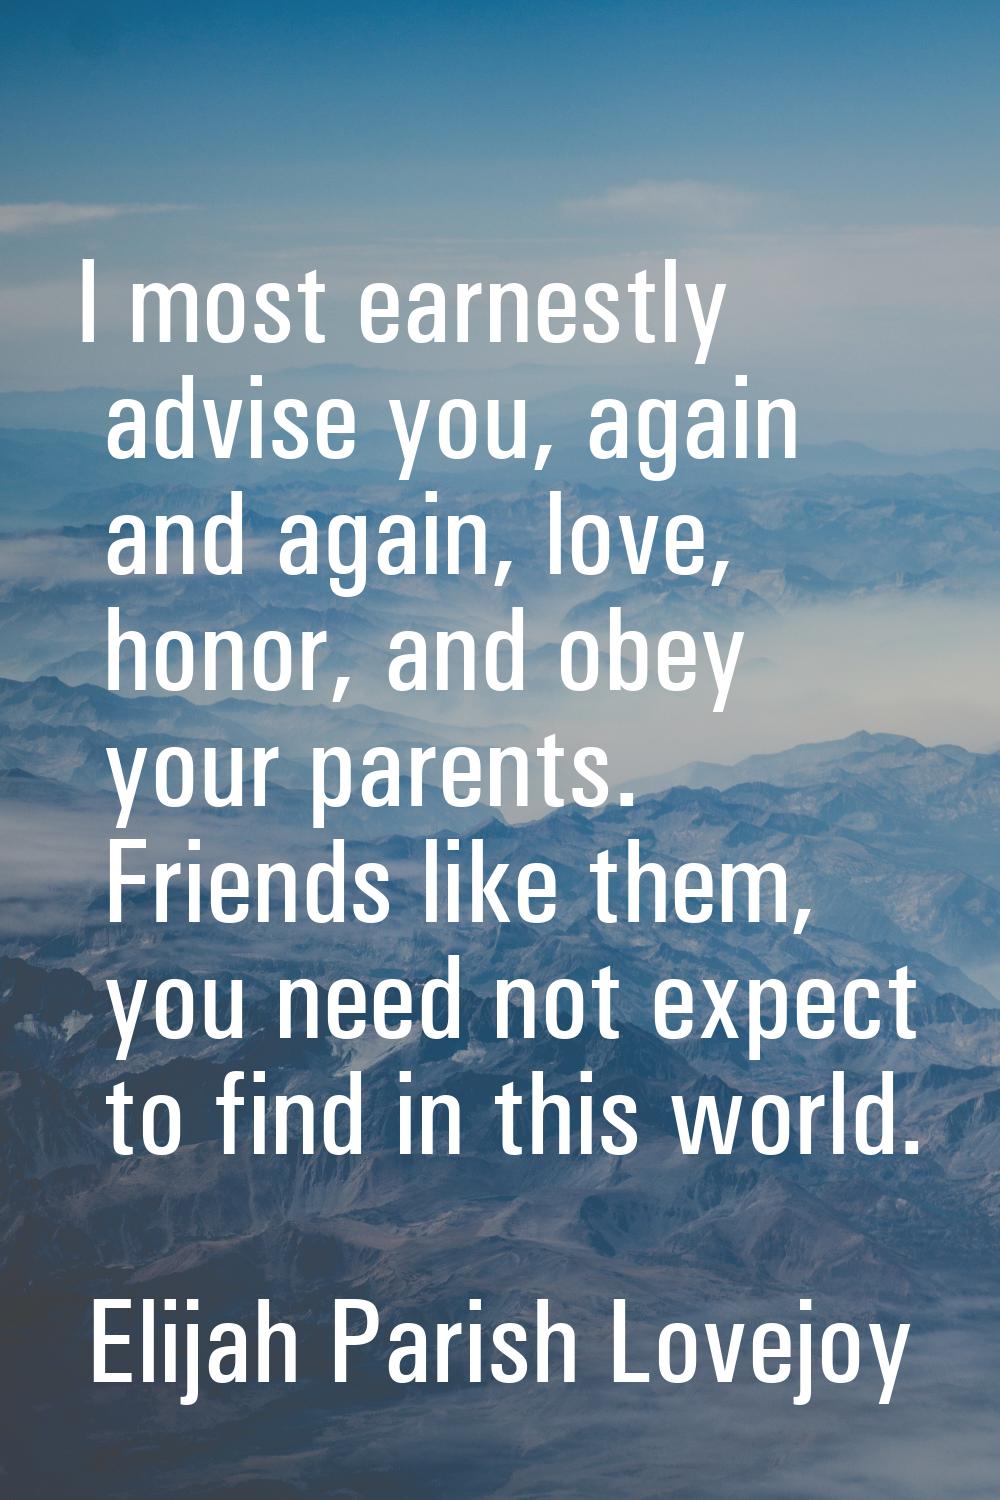 I most earnestly advise you, again and again, love, honor, and obey your parents. Friends like them